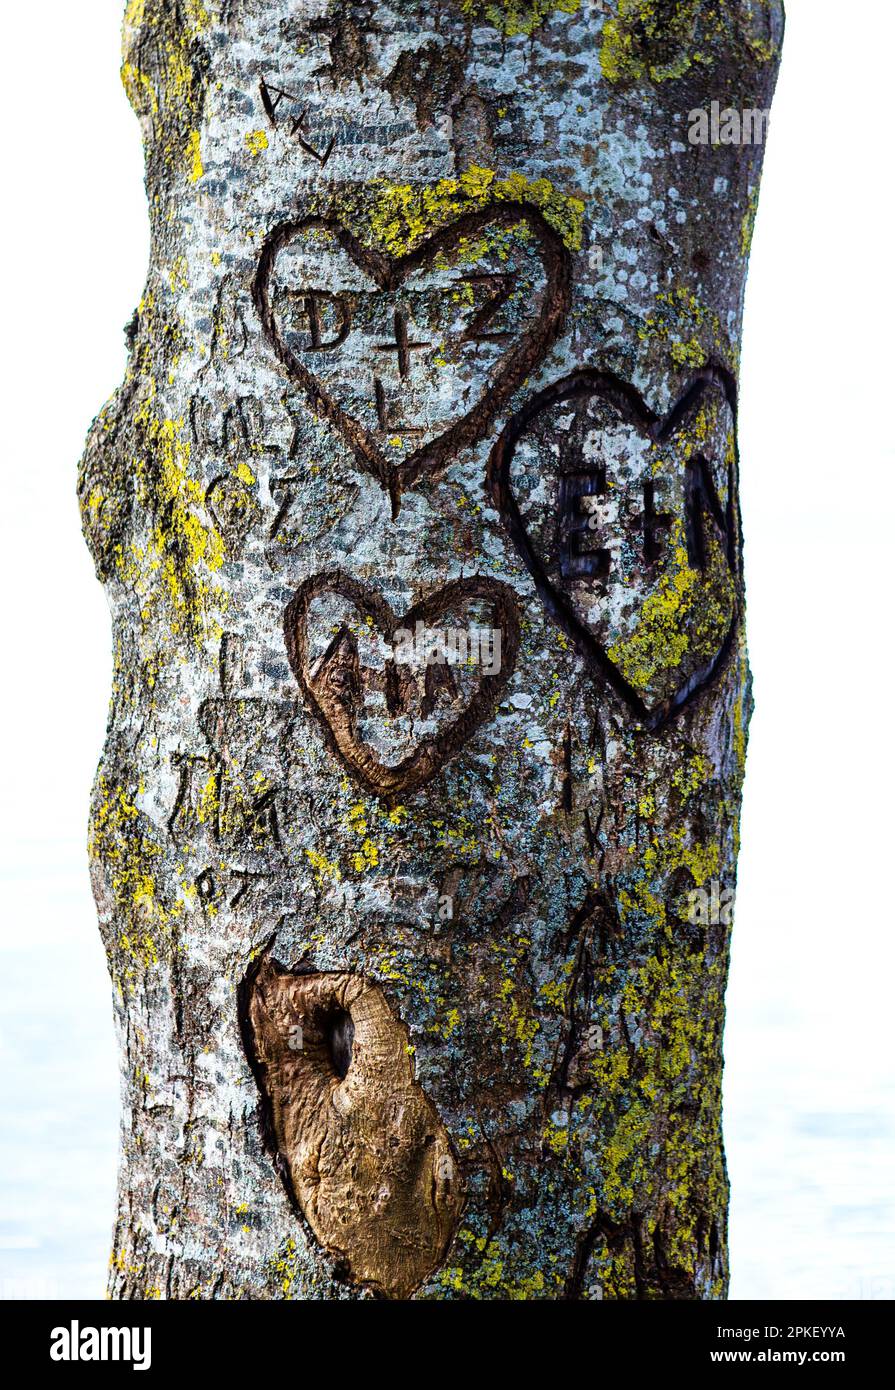 Carved, symbol, bark, tree, heart, letter, love, friends, relationship, relationships, memory, growth, youth, youth, return, past, contacts, communica Stock Photo